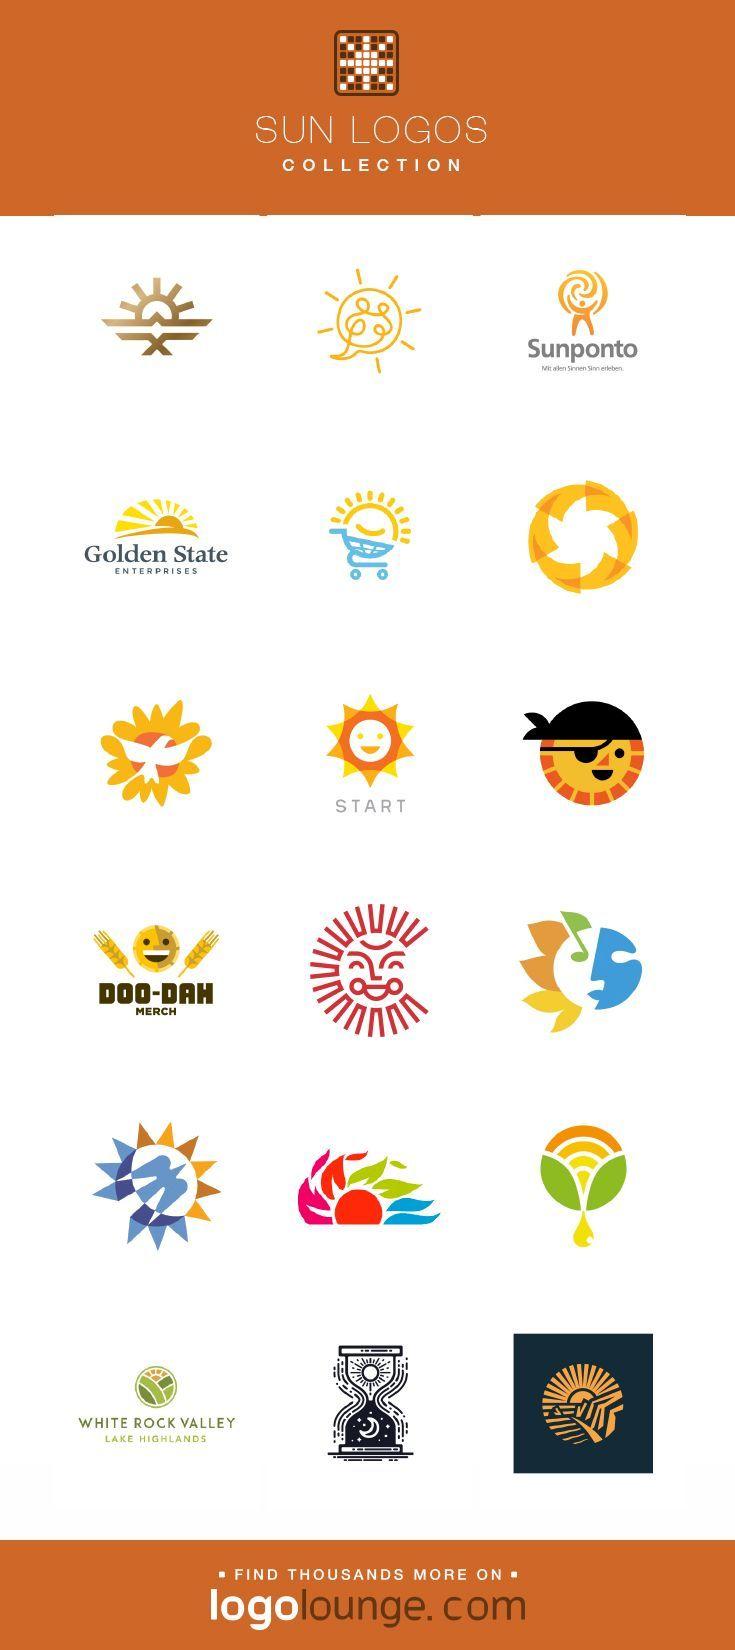 Yellow and a Leaf with an a Logo - Logo Collection : Sun vector logo designs. Light, shine, yellow, sky ...